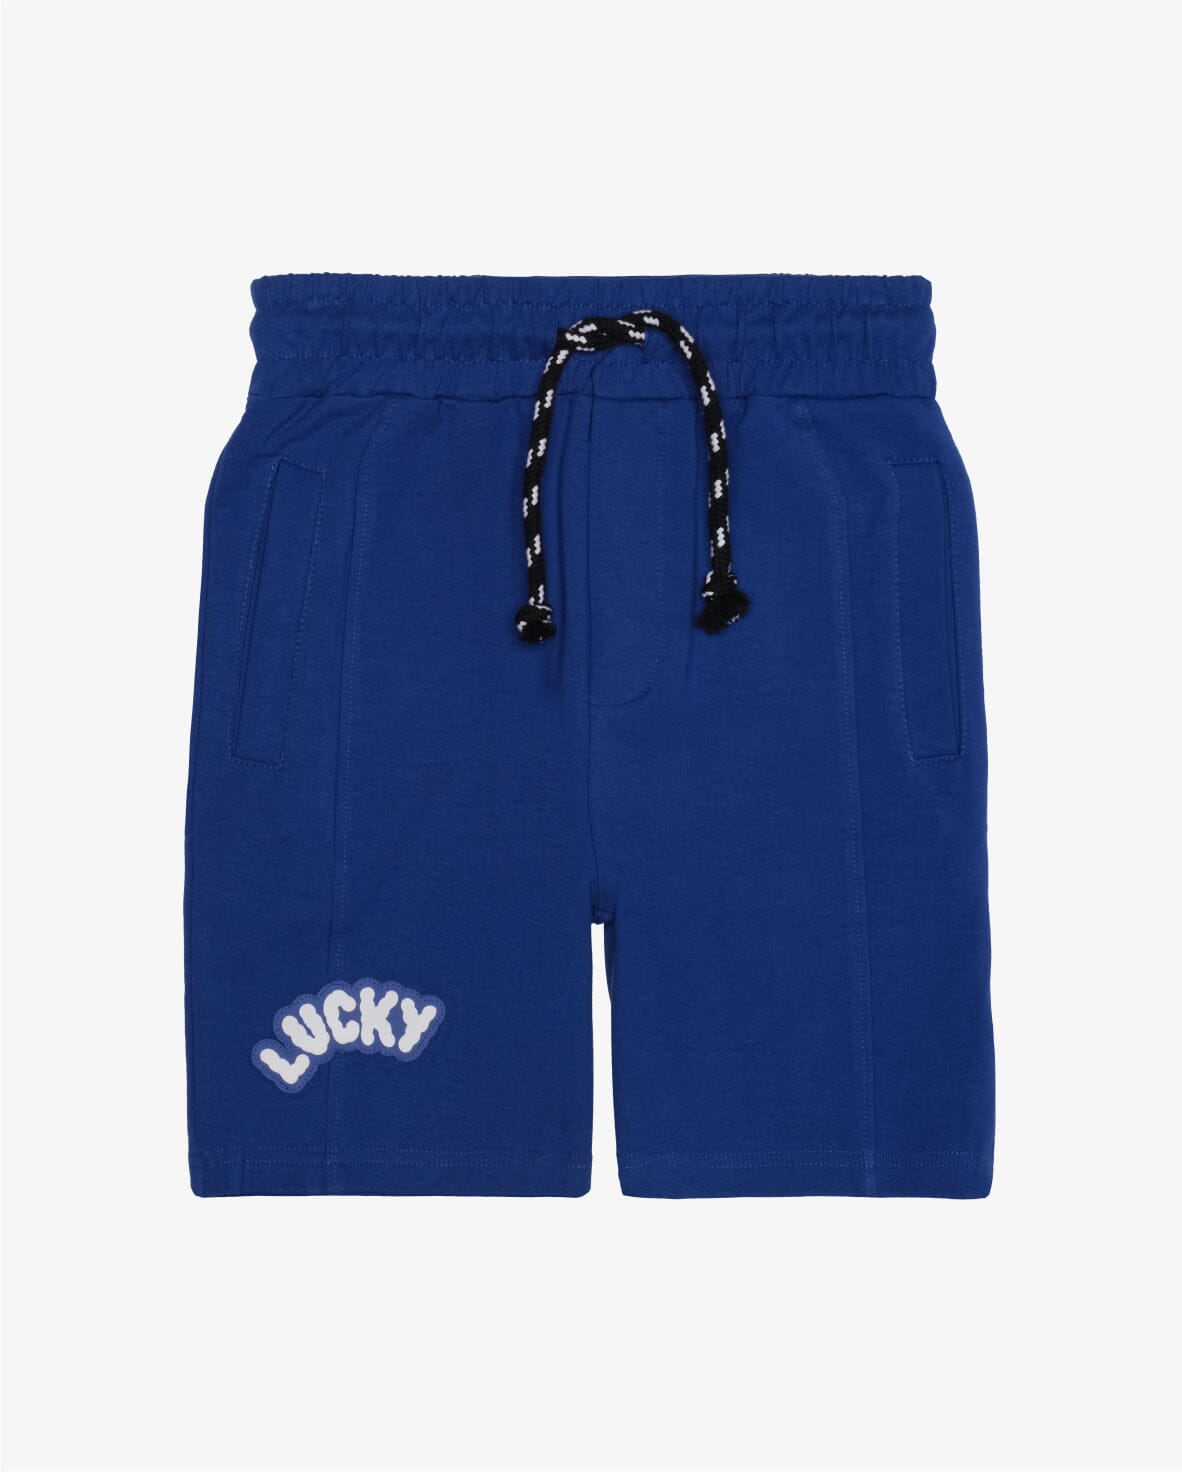 BAND OF BOYS | Lucky Shorts - Ink Blue Boys Band of Boys